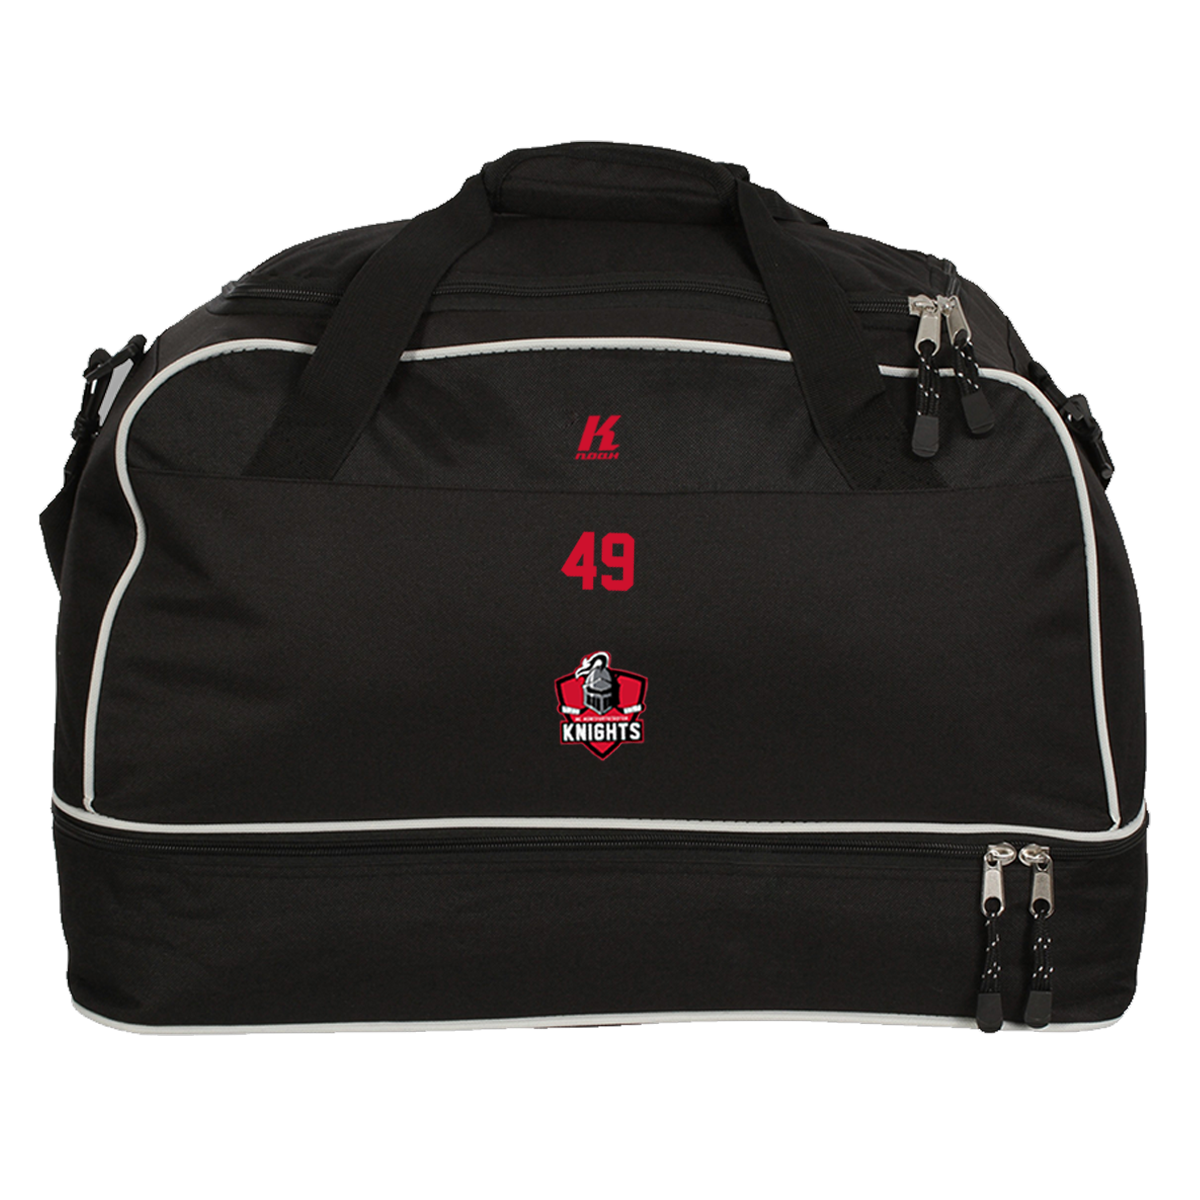 HCK Players CT Bag with Playernumber or Initials